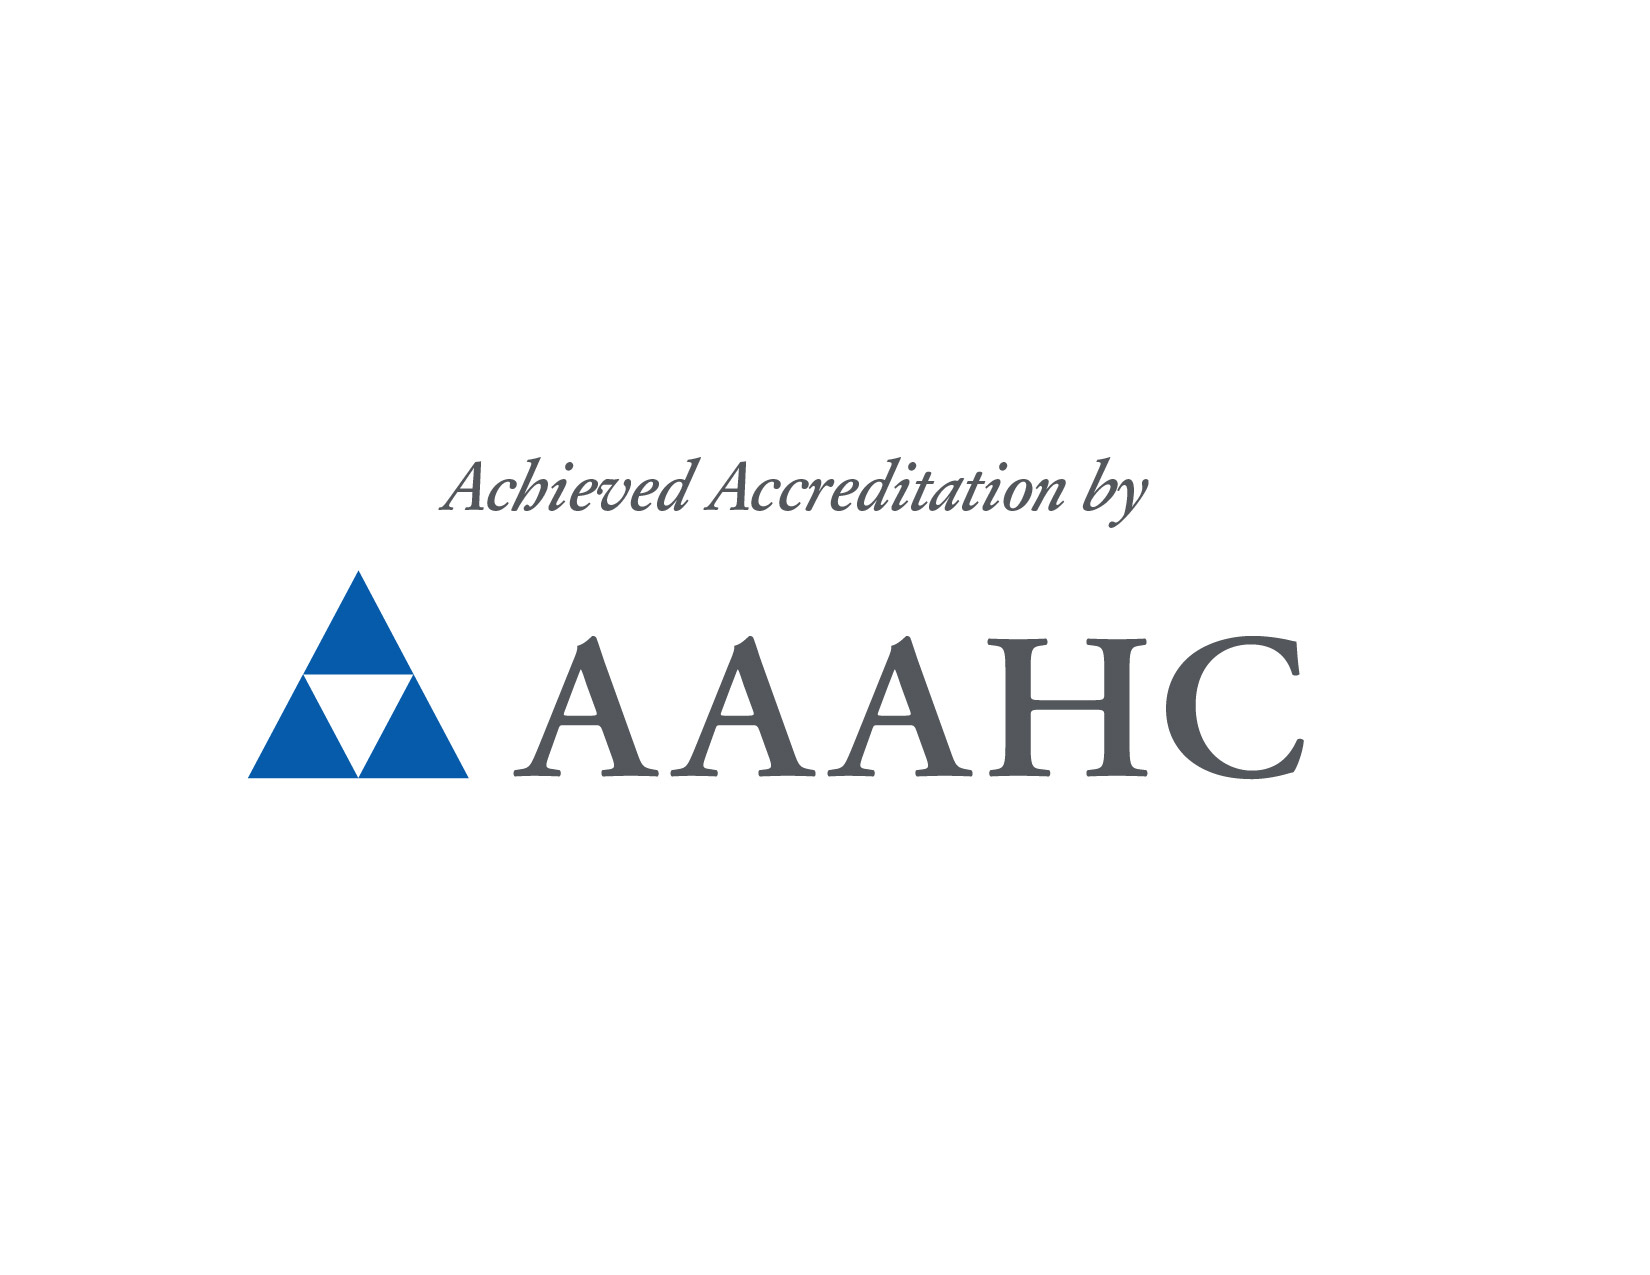 Achieved Accreditation by AAAHC with small white inverted triangle inside a blue triangle.